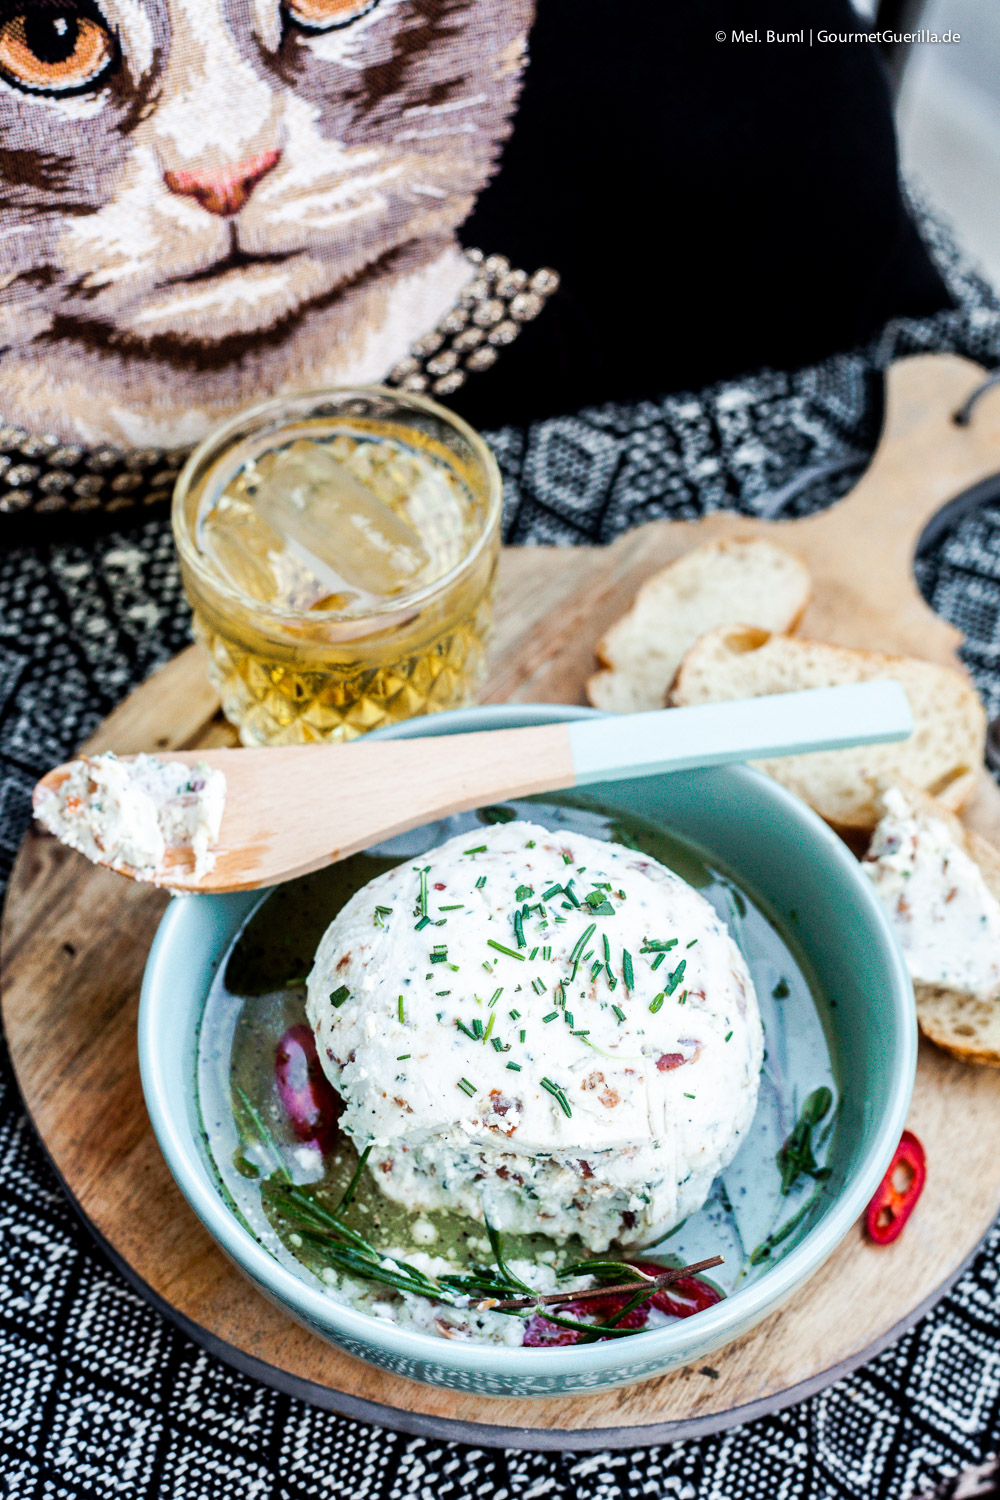  Ball of goat cream cheese with rosemary and bacon in cider vinaigrette | GourmetGuerilla .com 